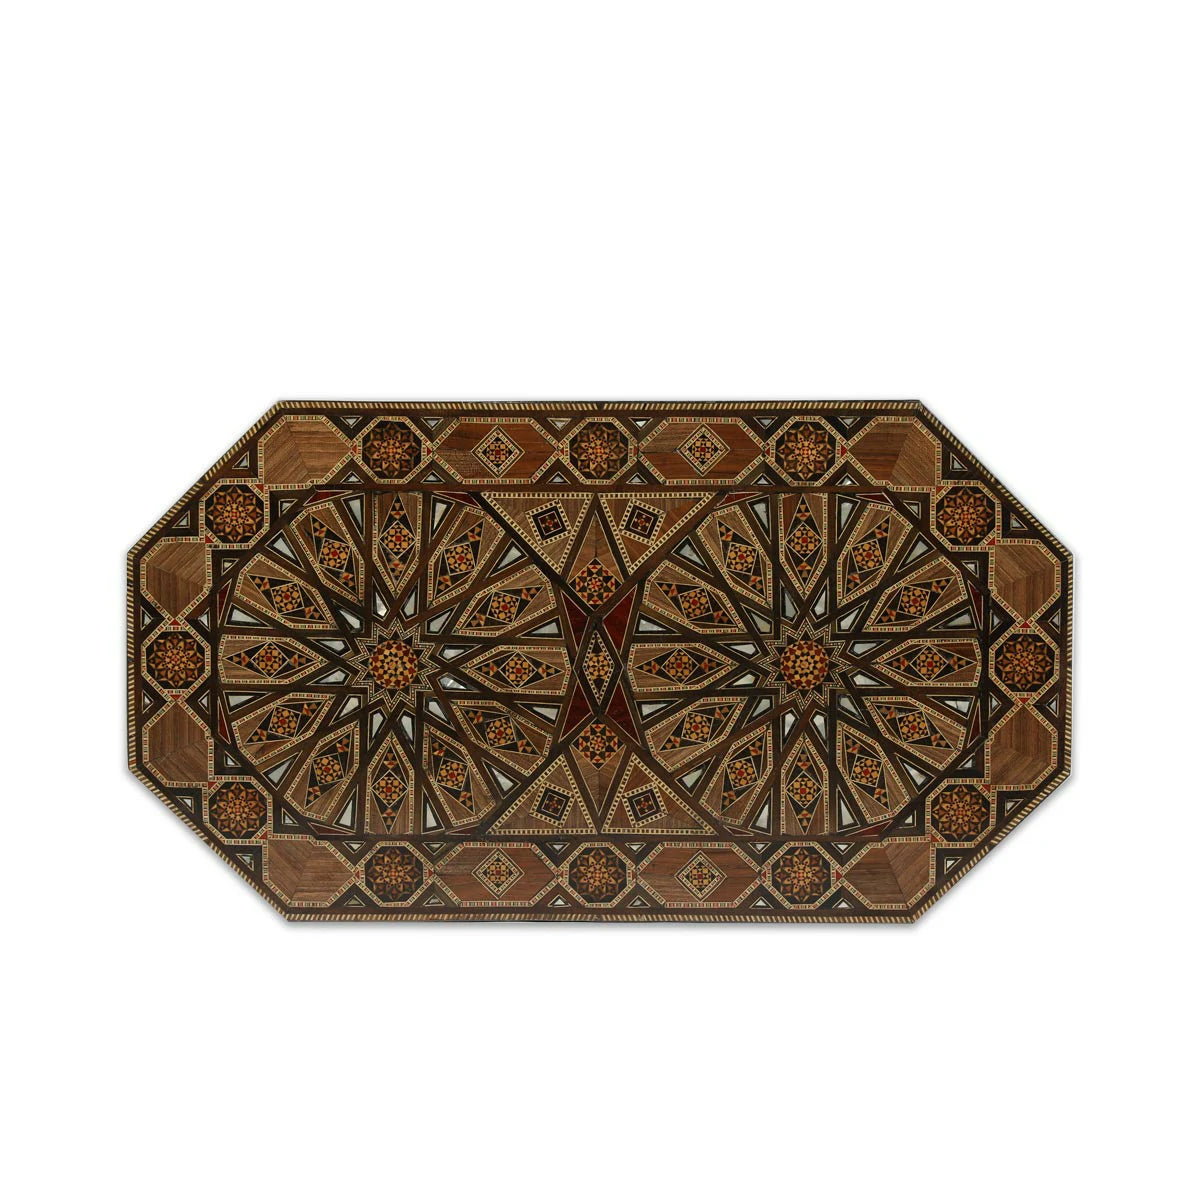 Exceptional Syrian Marquetry Inlays of Mixed woods, Mother of Pearls & Mosaic in Traditional Arabesque Motifs